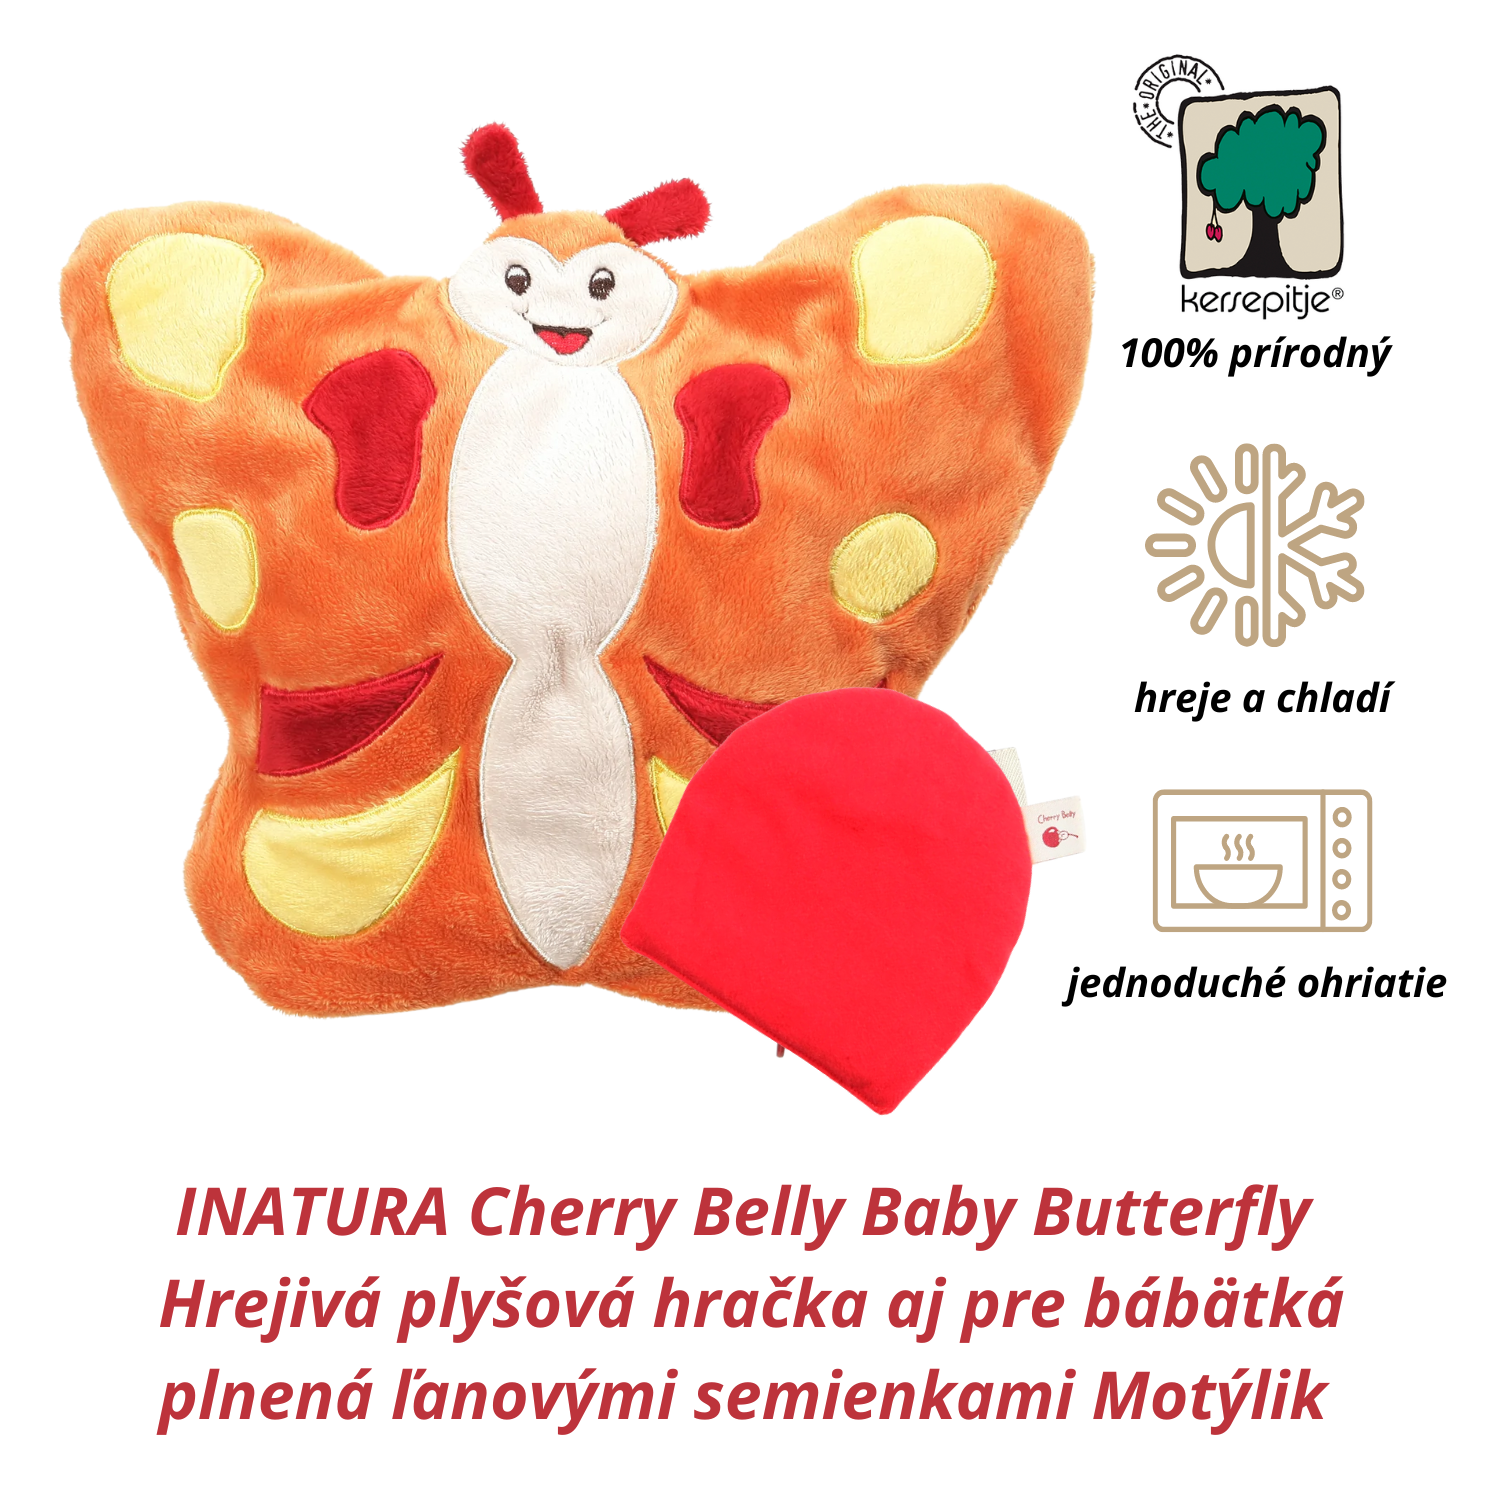 INATURA Cherry Belly Baby Butterfly